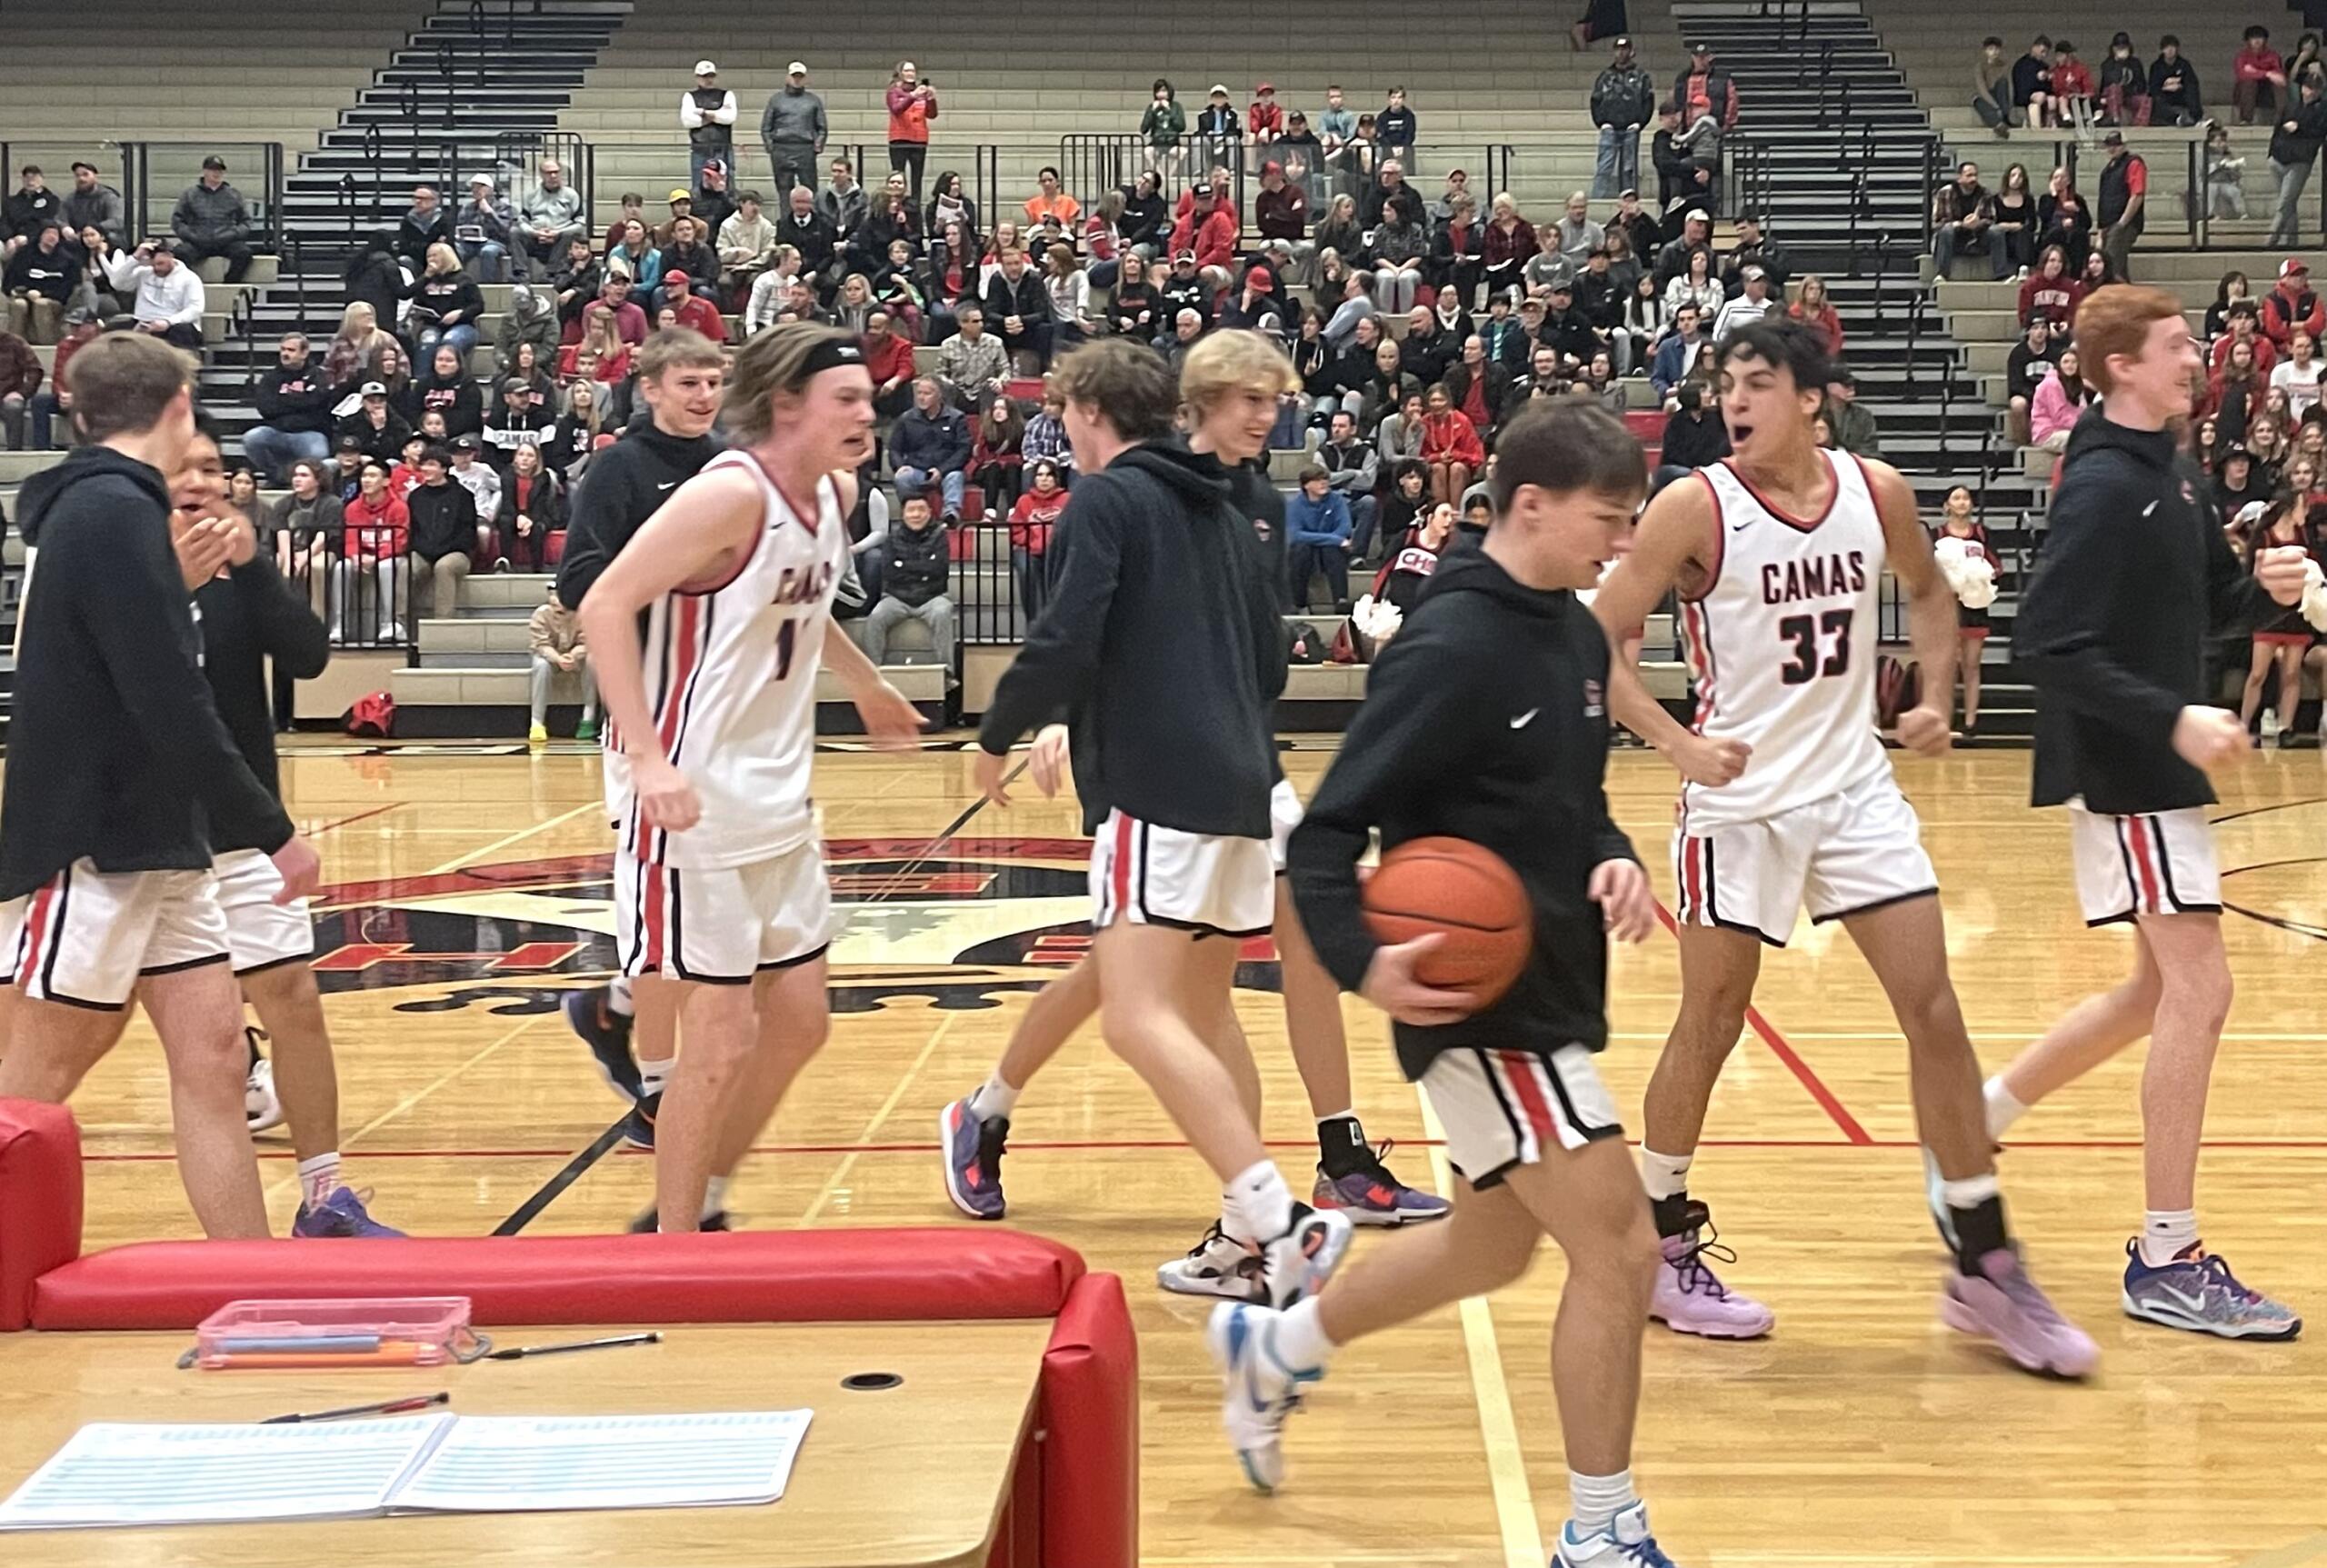 Camas players walk to the bench prior to the start of the team's 4A bi-district playoff game against Bellarmine Prep on Saturday, Feb. 11, 2023, at Camas High School.